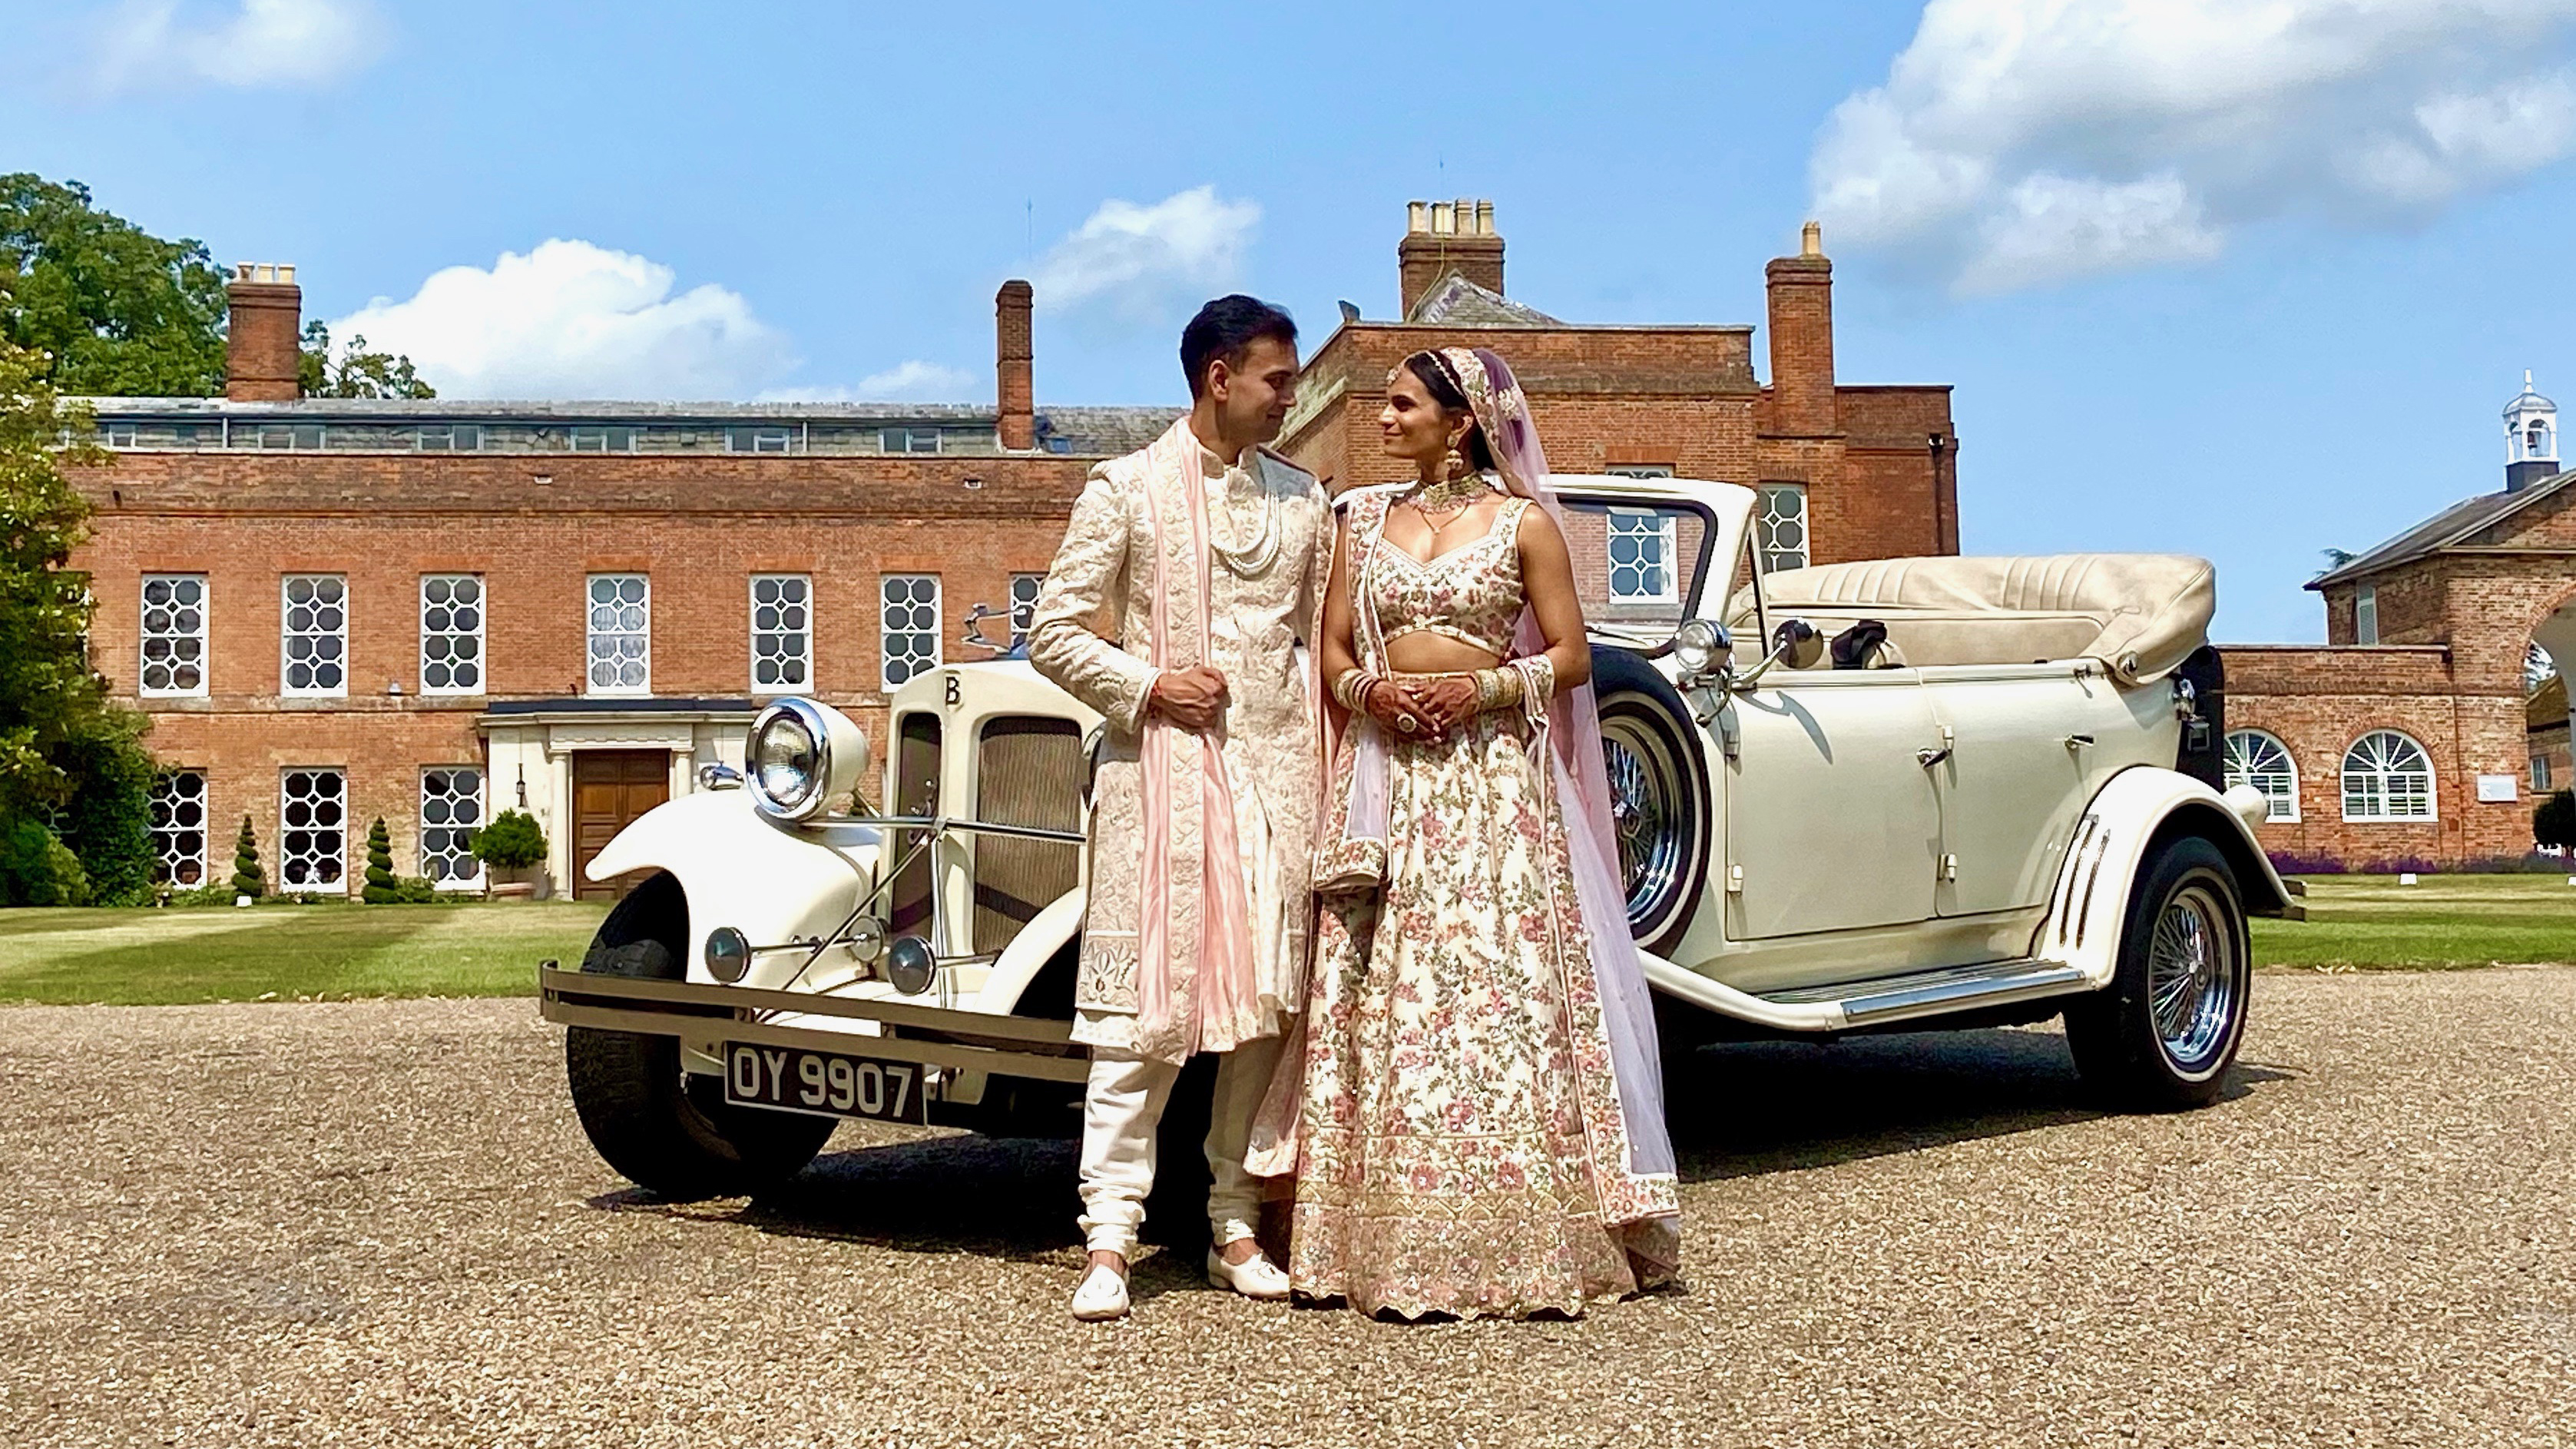 Convertible vintage style Beauford with roof down with newly wed Asian couple standing in front of the vehicle looking at each others. Vehicle is parked in front of a large manor house in Sutton